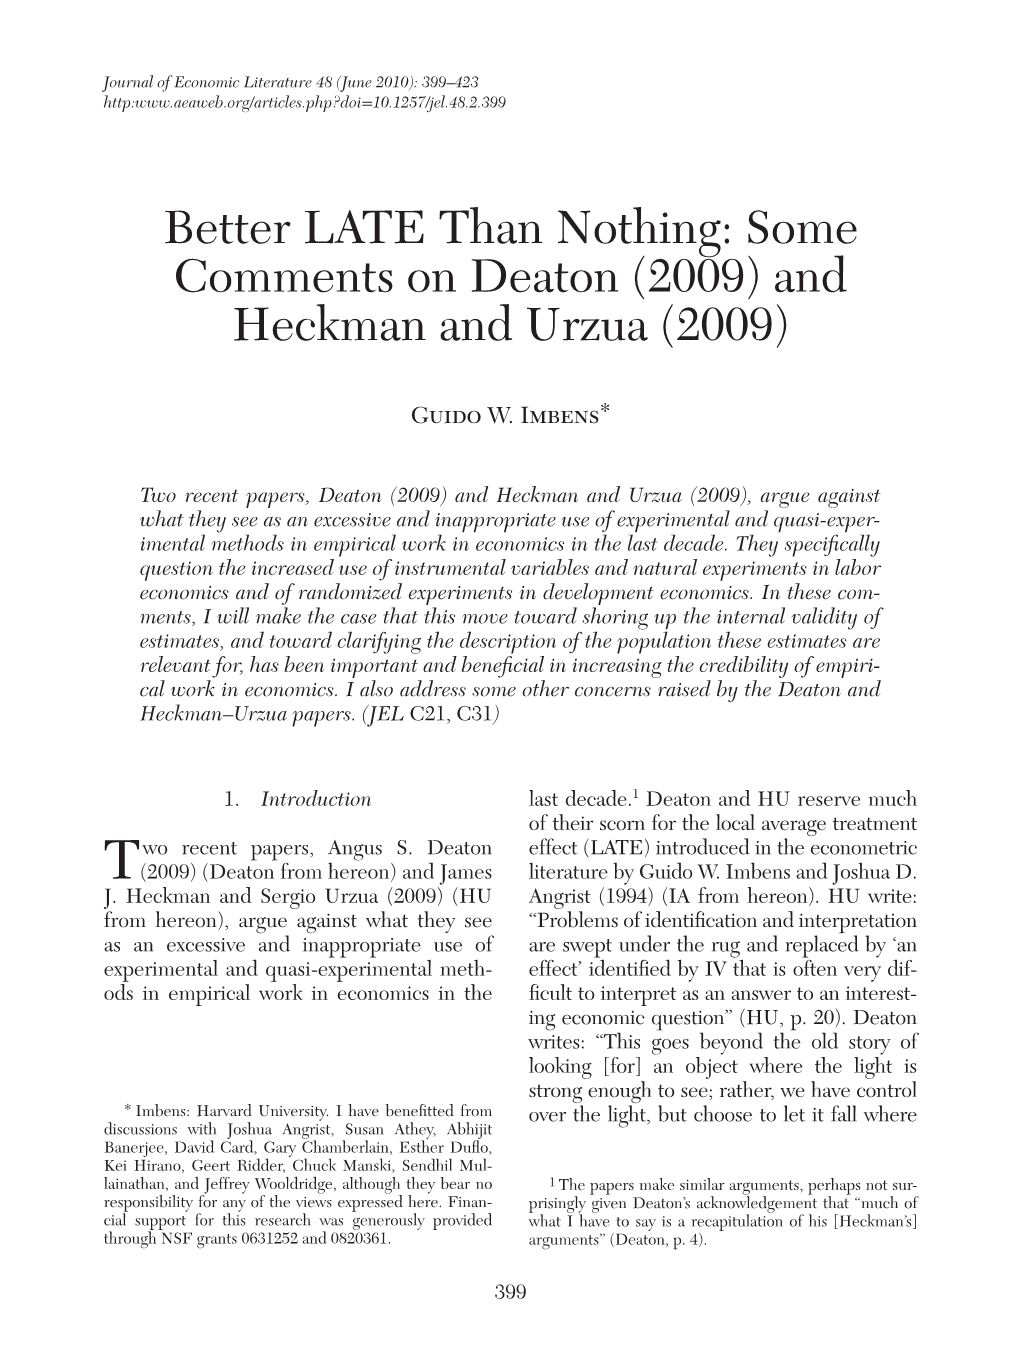 Better LATE Than Nothing: Some Comments on Deaton (2009) and Heckman and Urzua (2009)